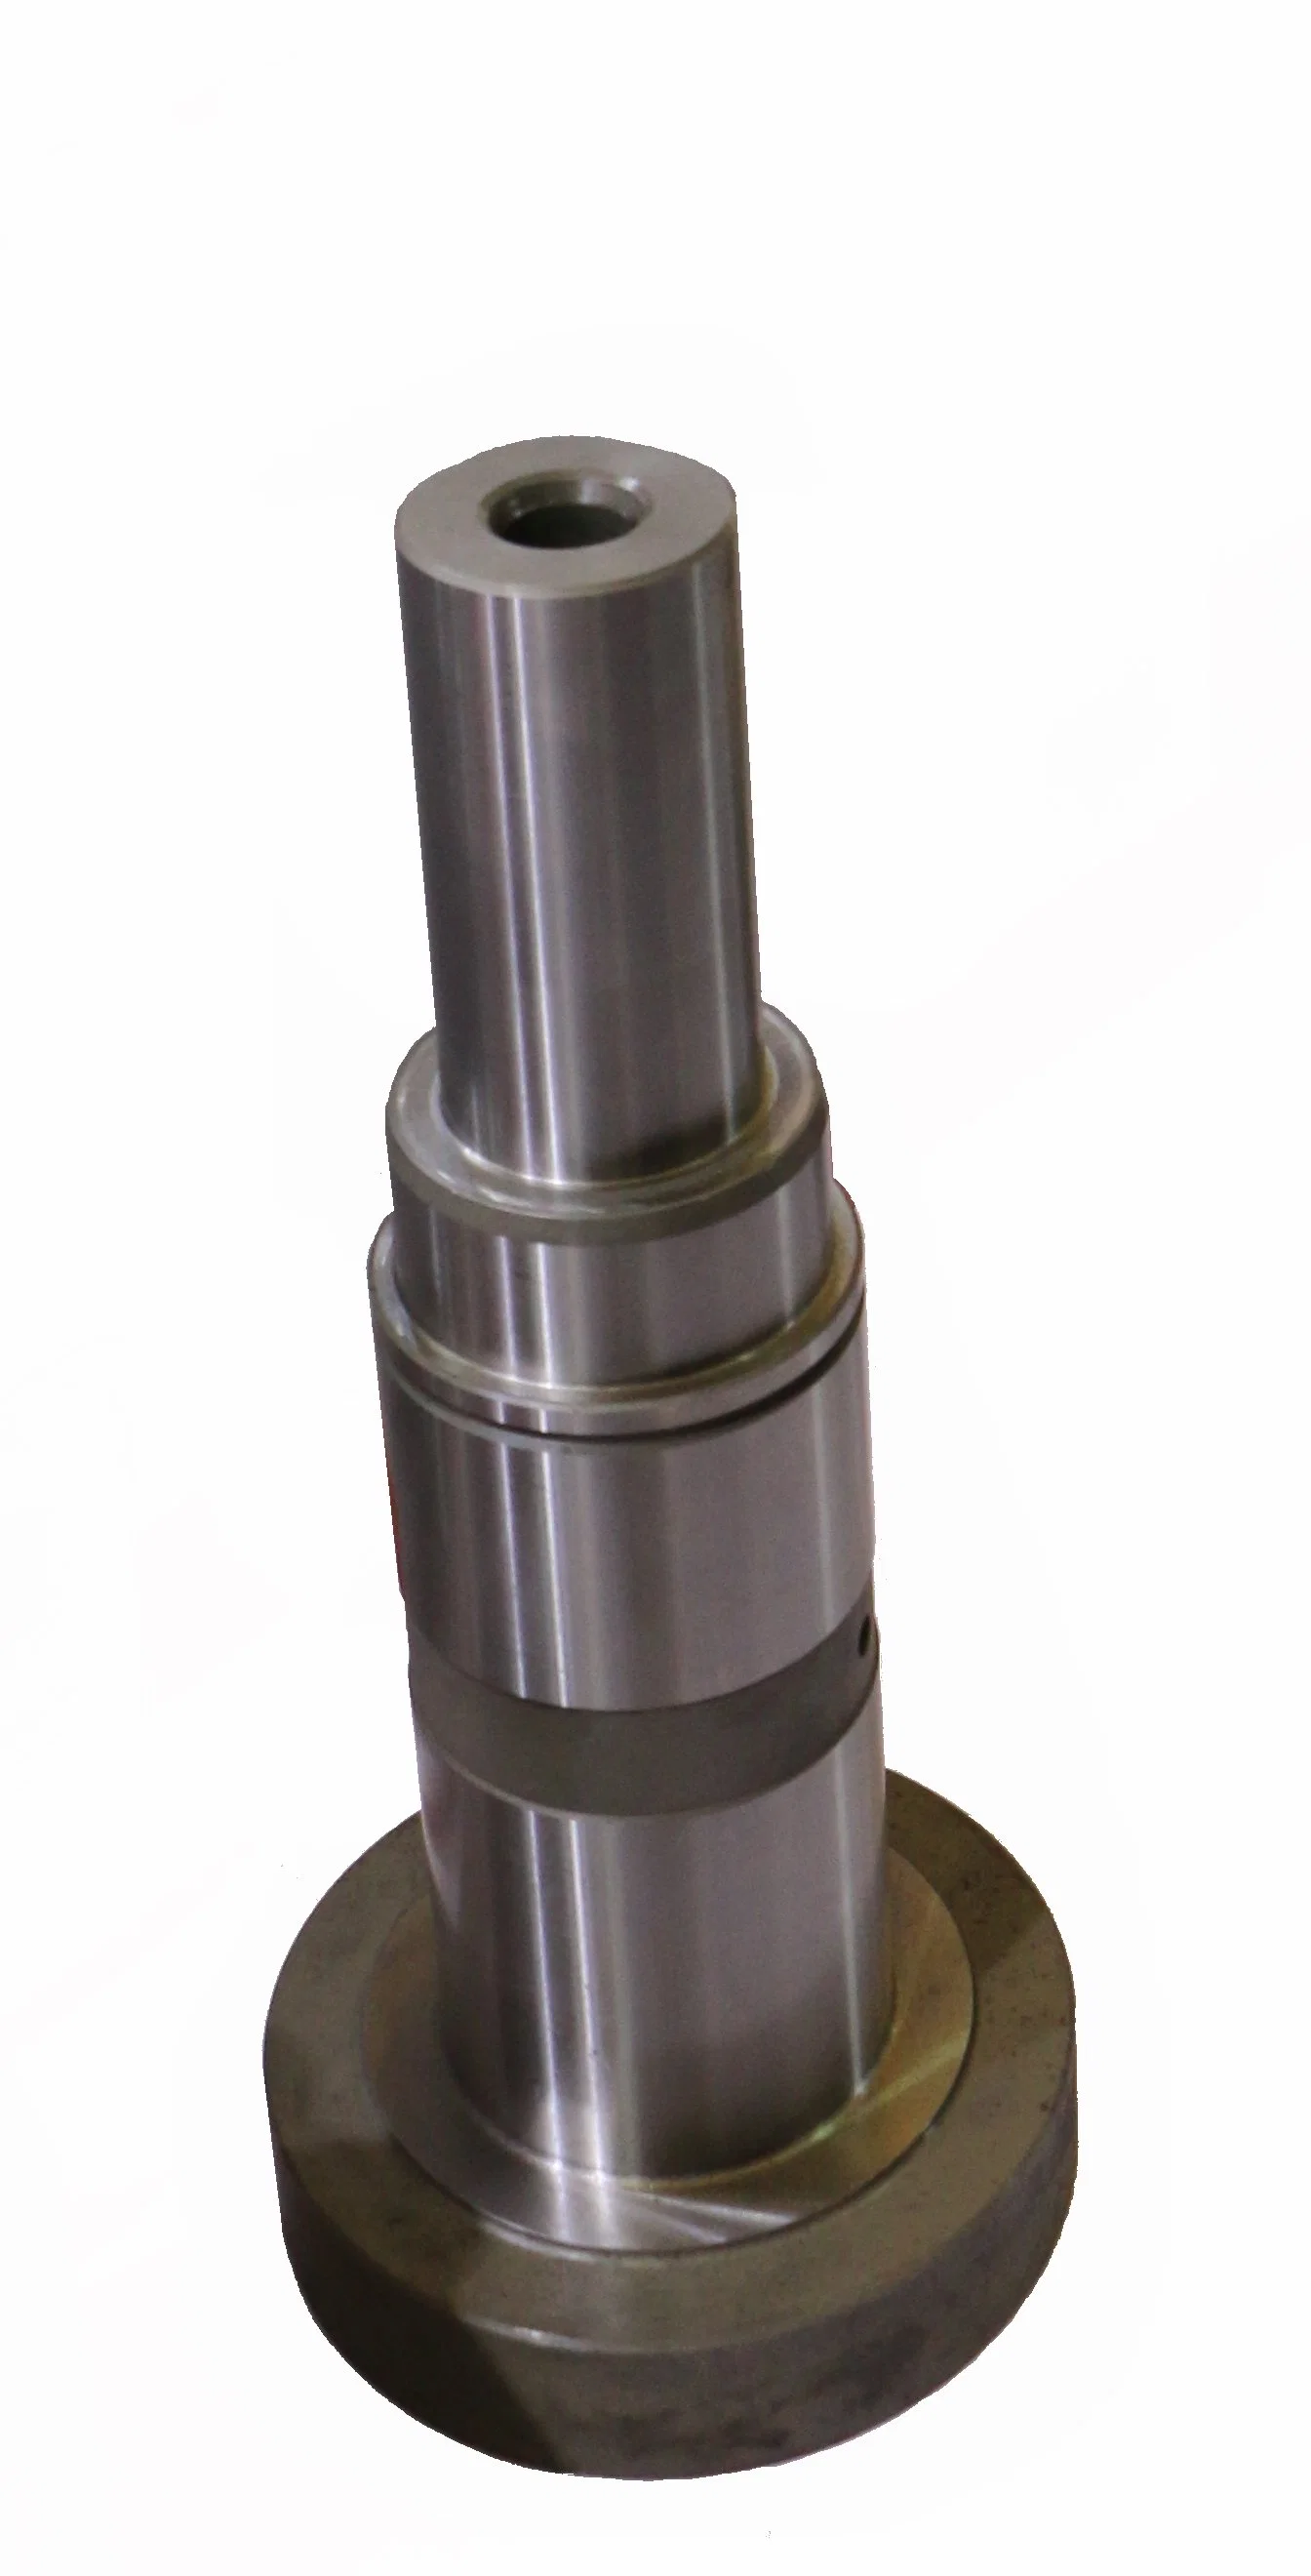 Transmission Shaft for Printing Machinery 02s01 02